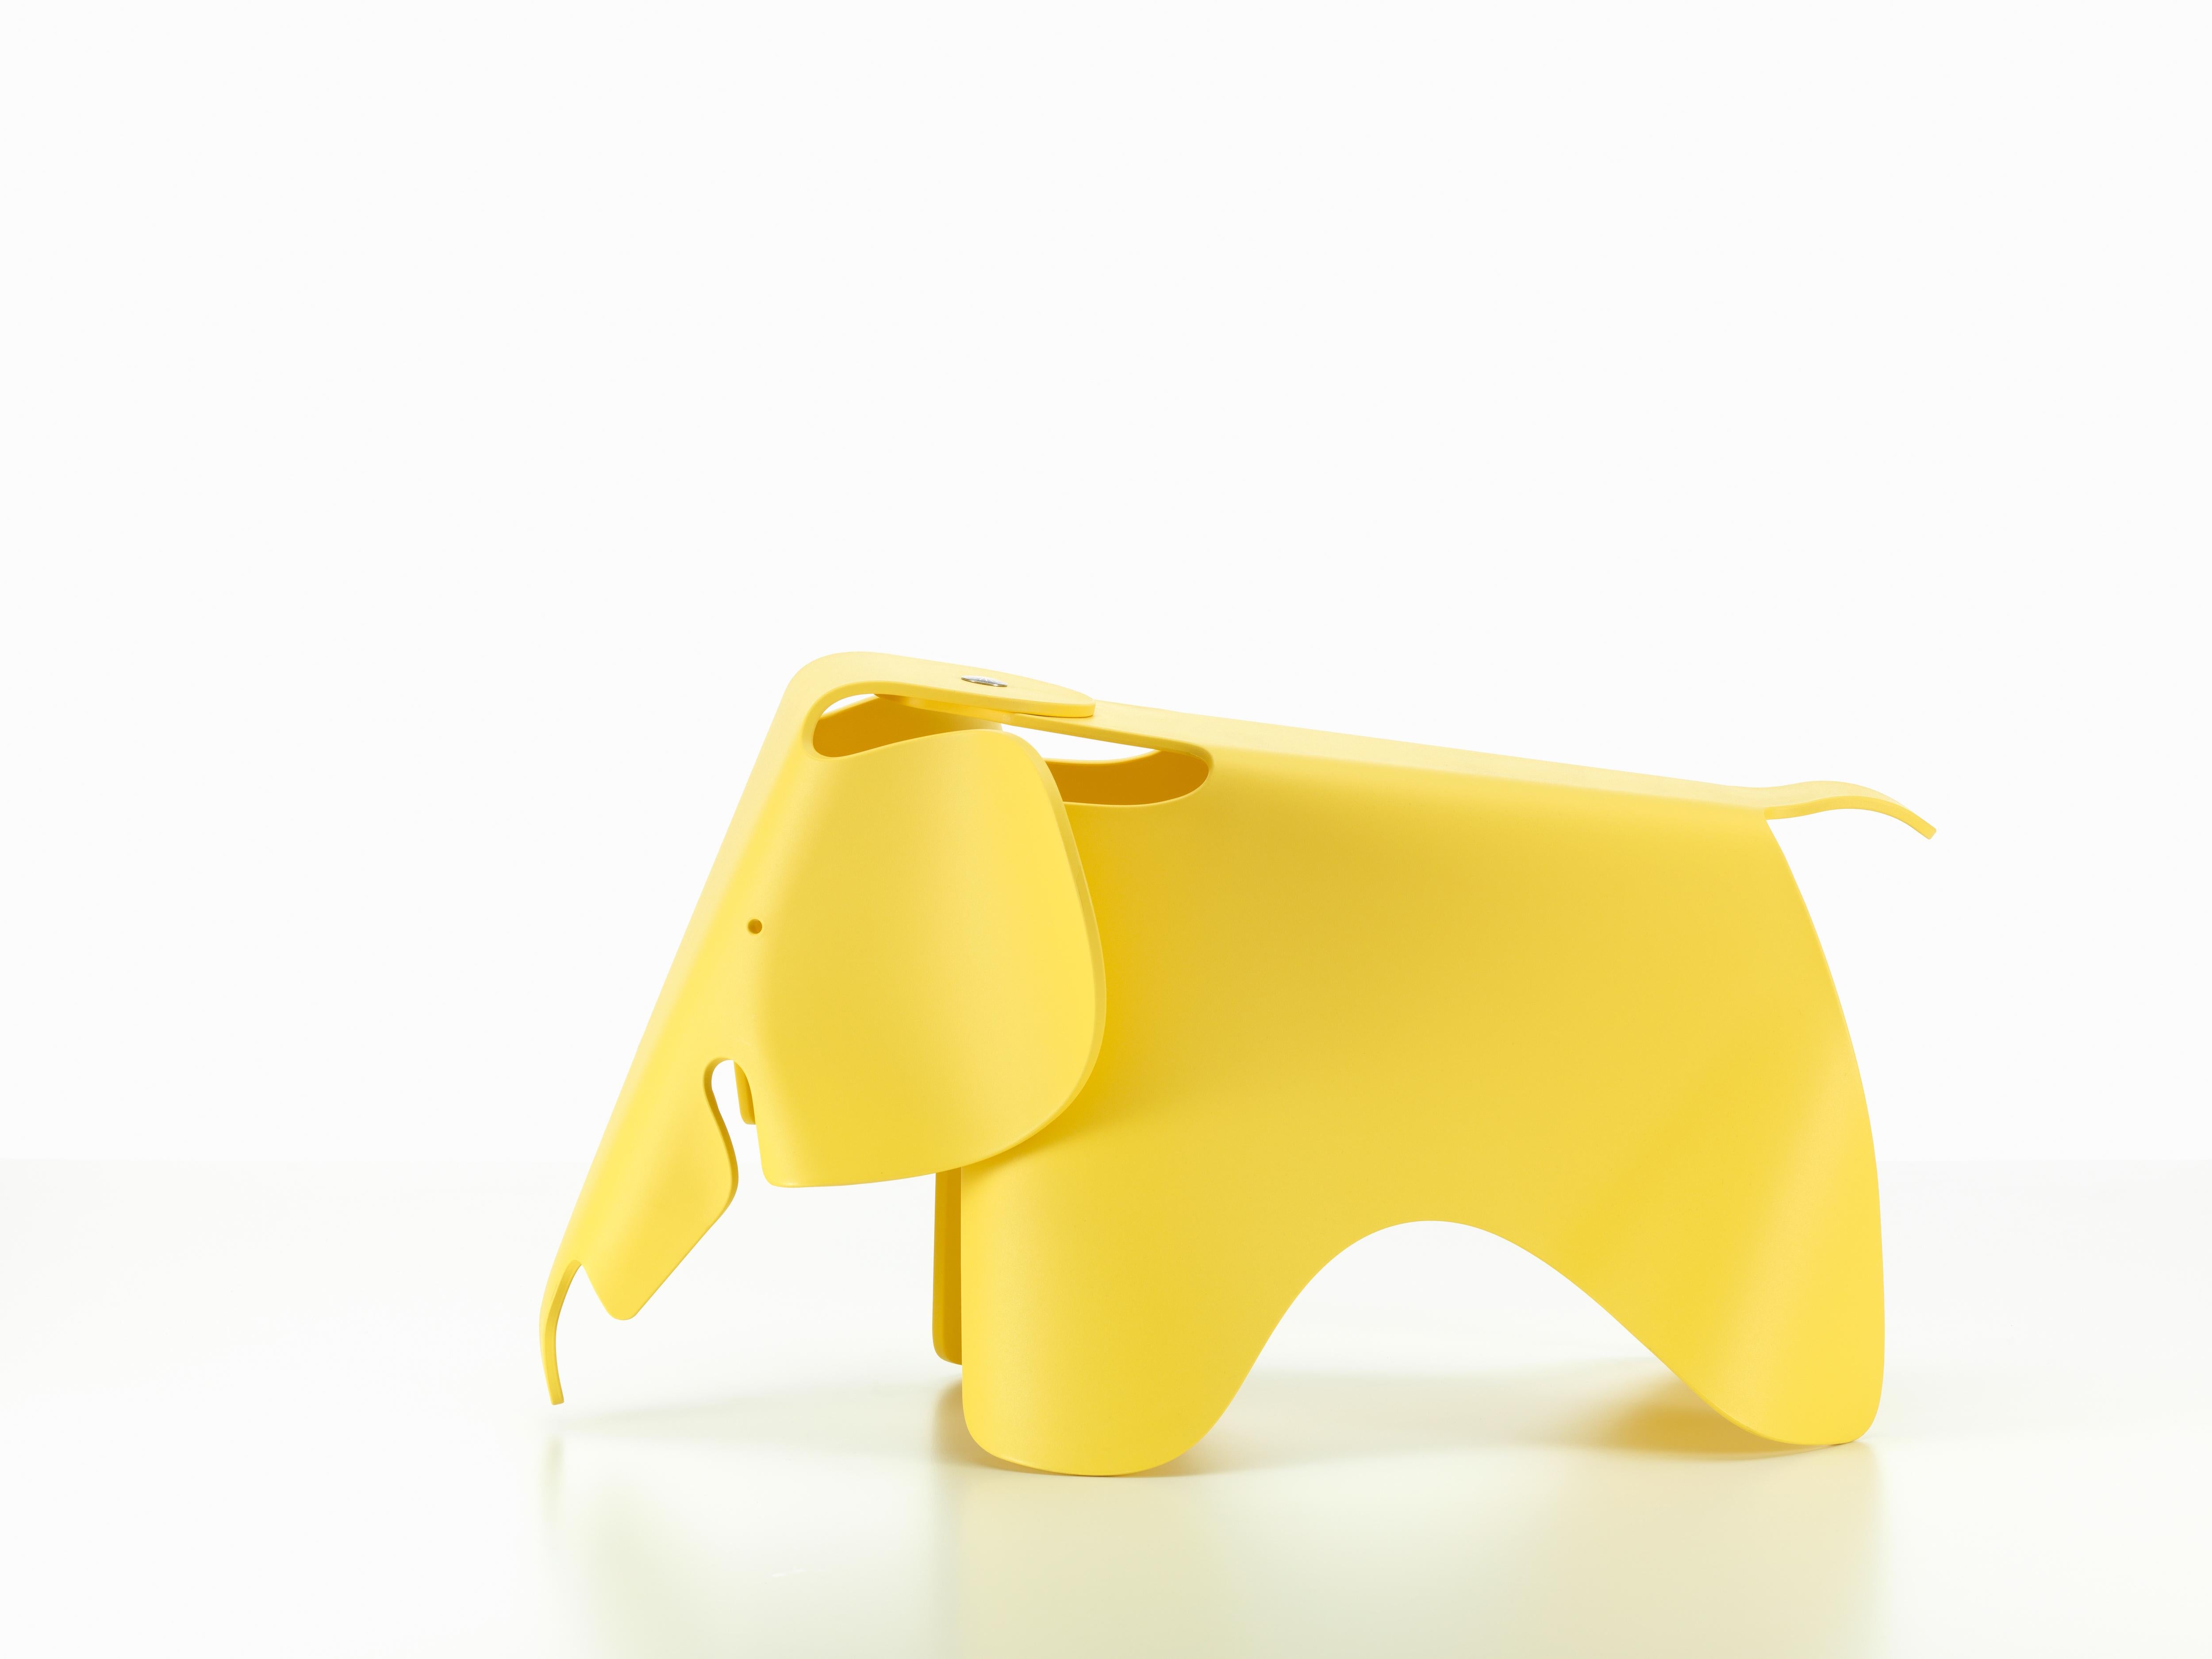 These items are currently only available in the United States.

Charles and Ray Eames developed a toy elephant made of plywood in 1945; however, this piece never went into production. A scaled-down version, the Eames Elephant (small) made of